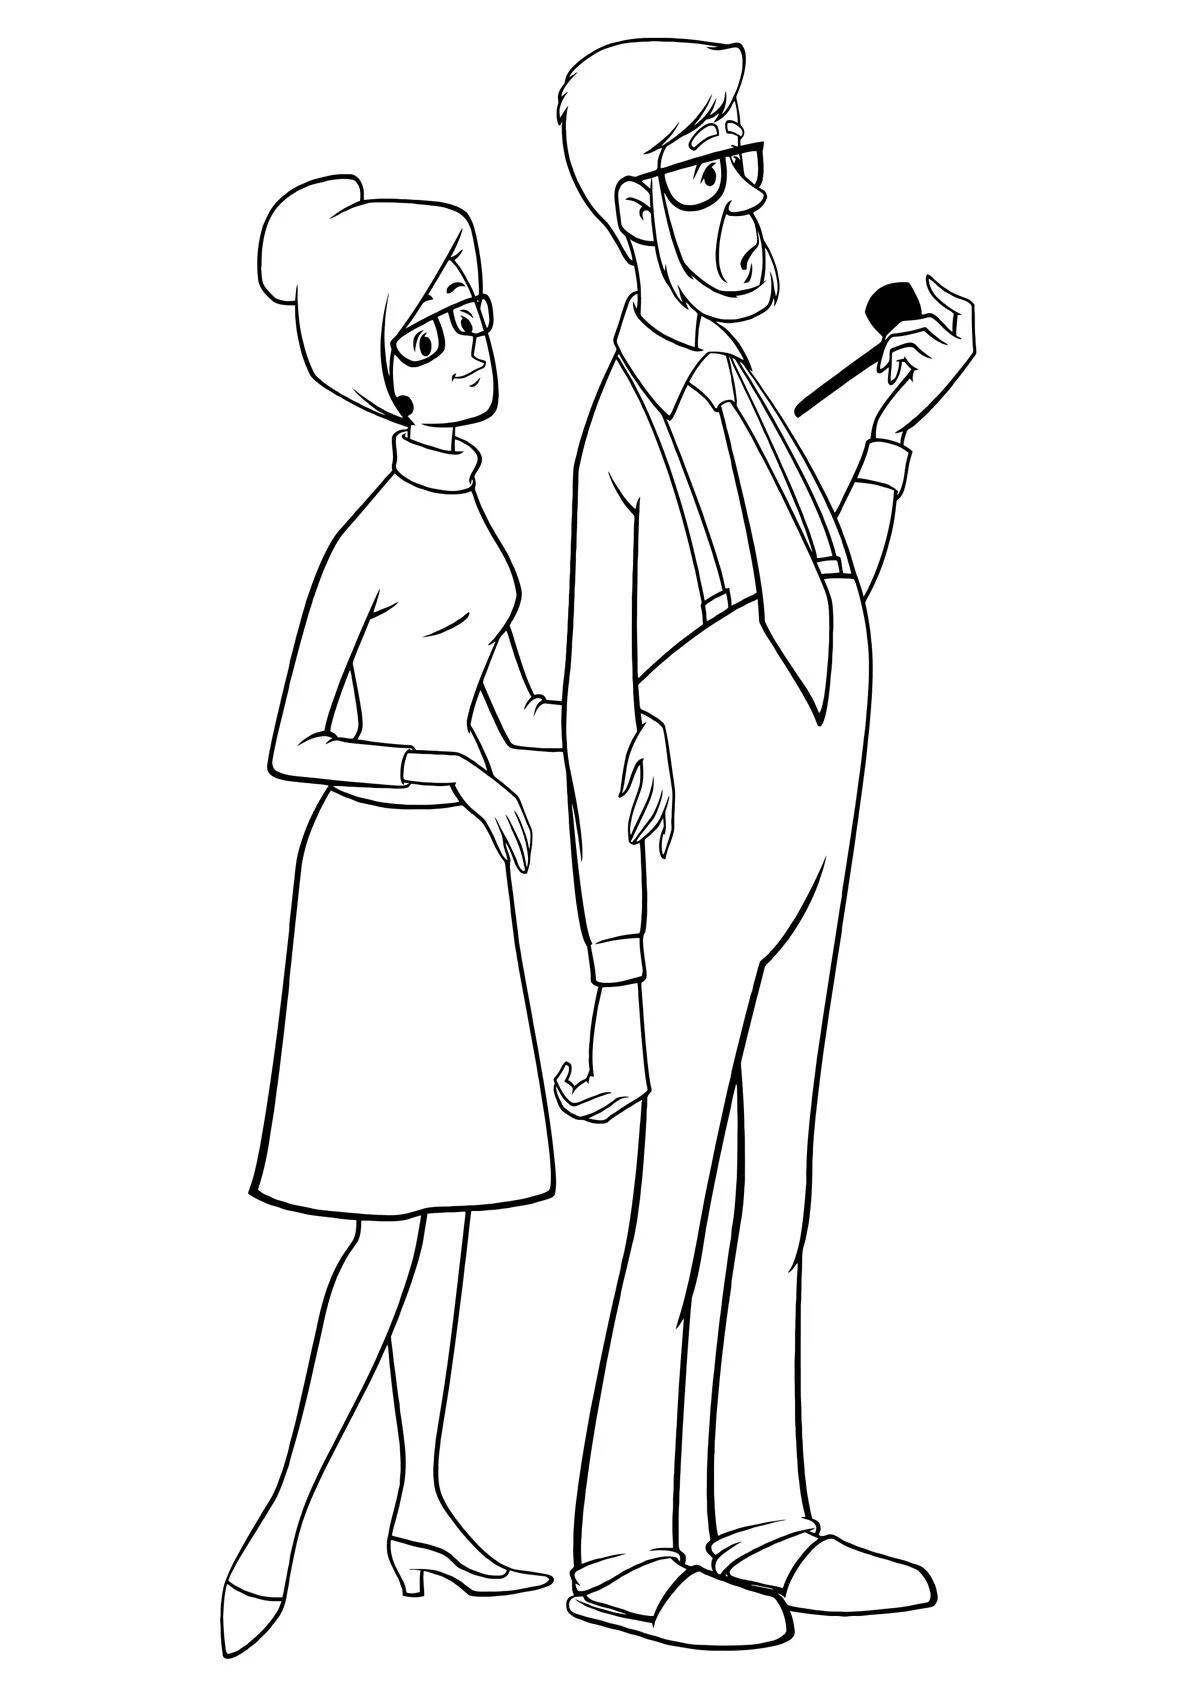 Coloring pages for parents